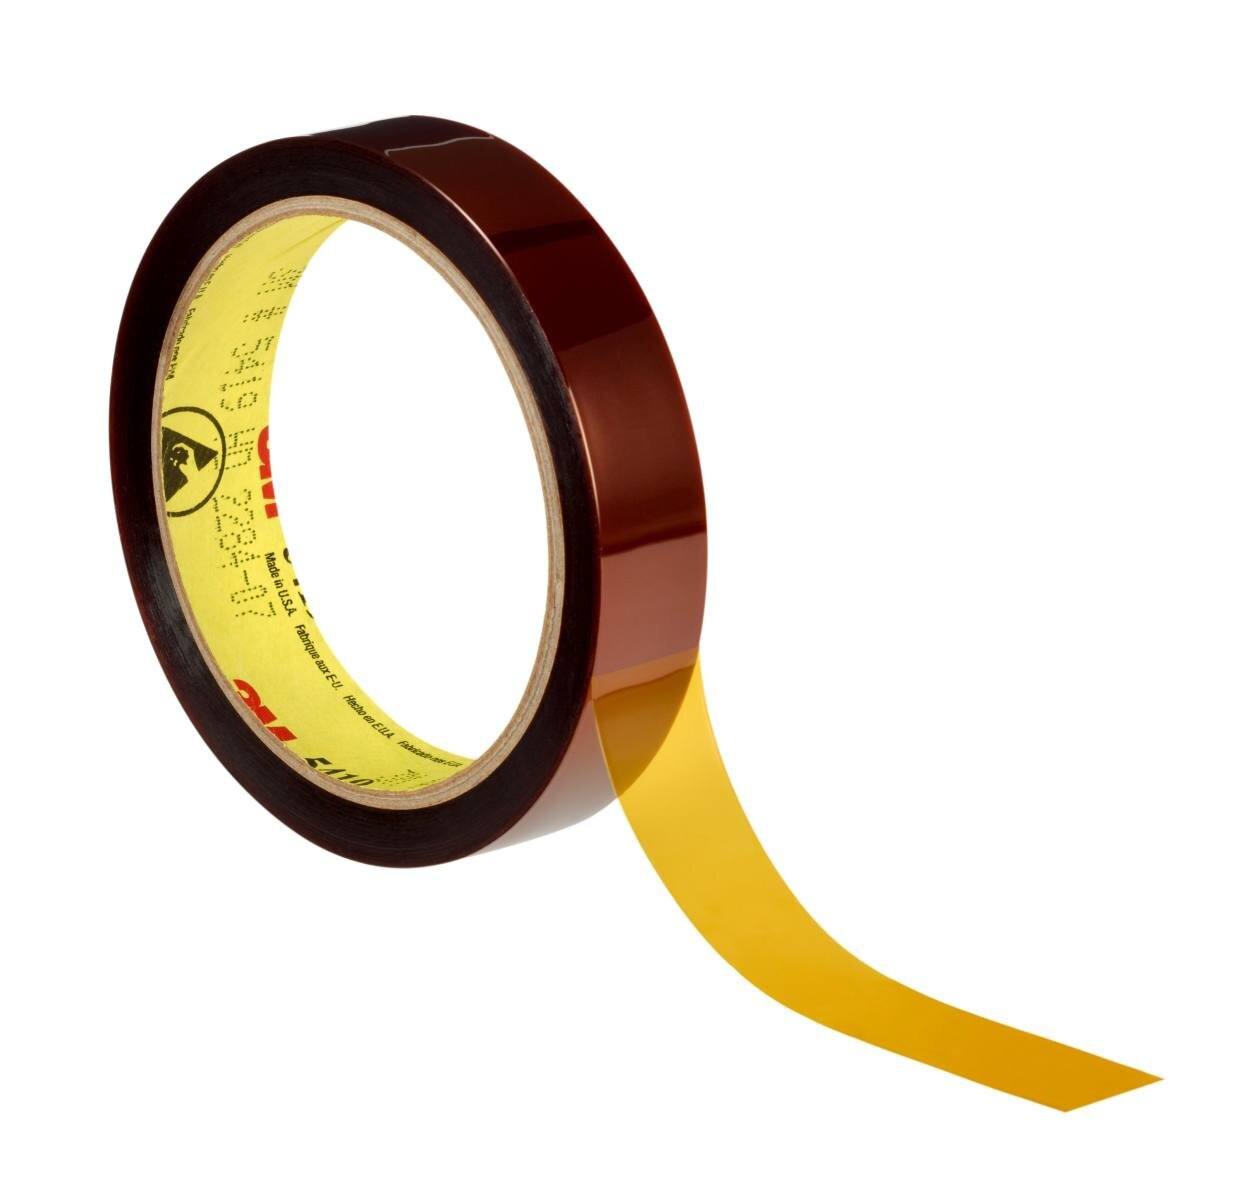 3M High-temperature polyimide adhesive tape 5419, brown, 25.4 mm x 33 m, 68.58 Âµm